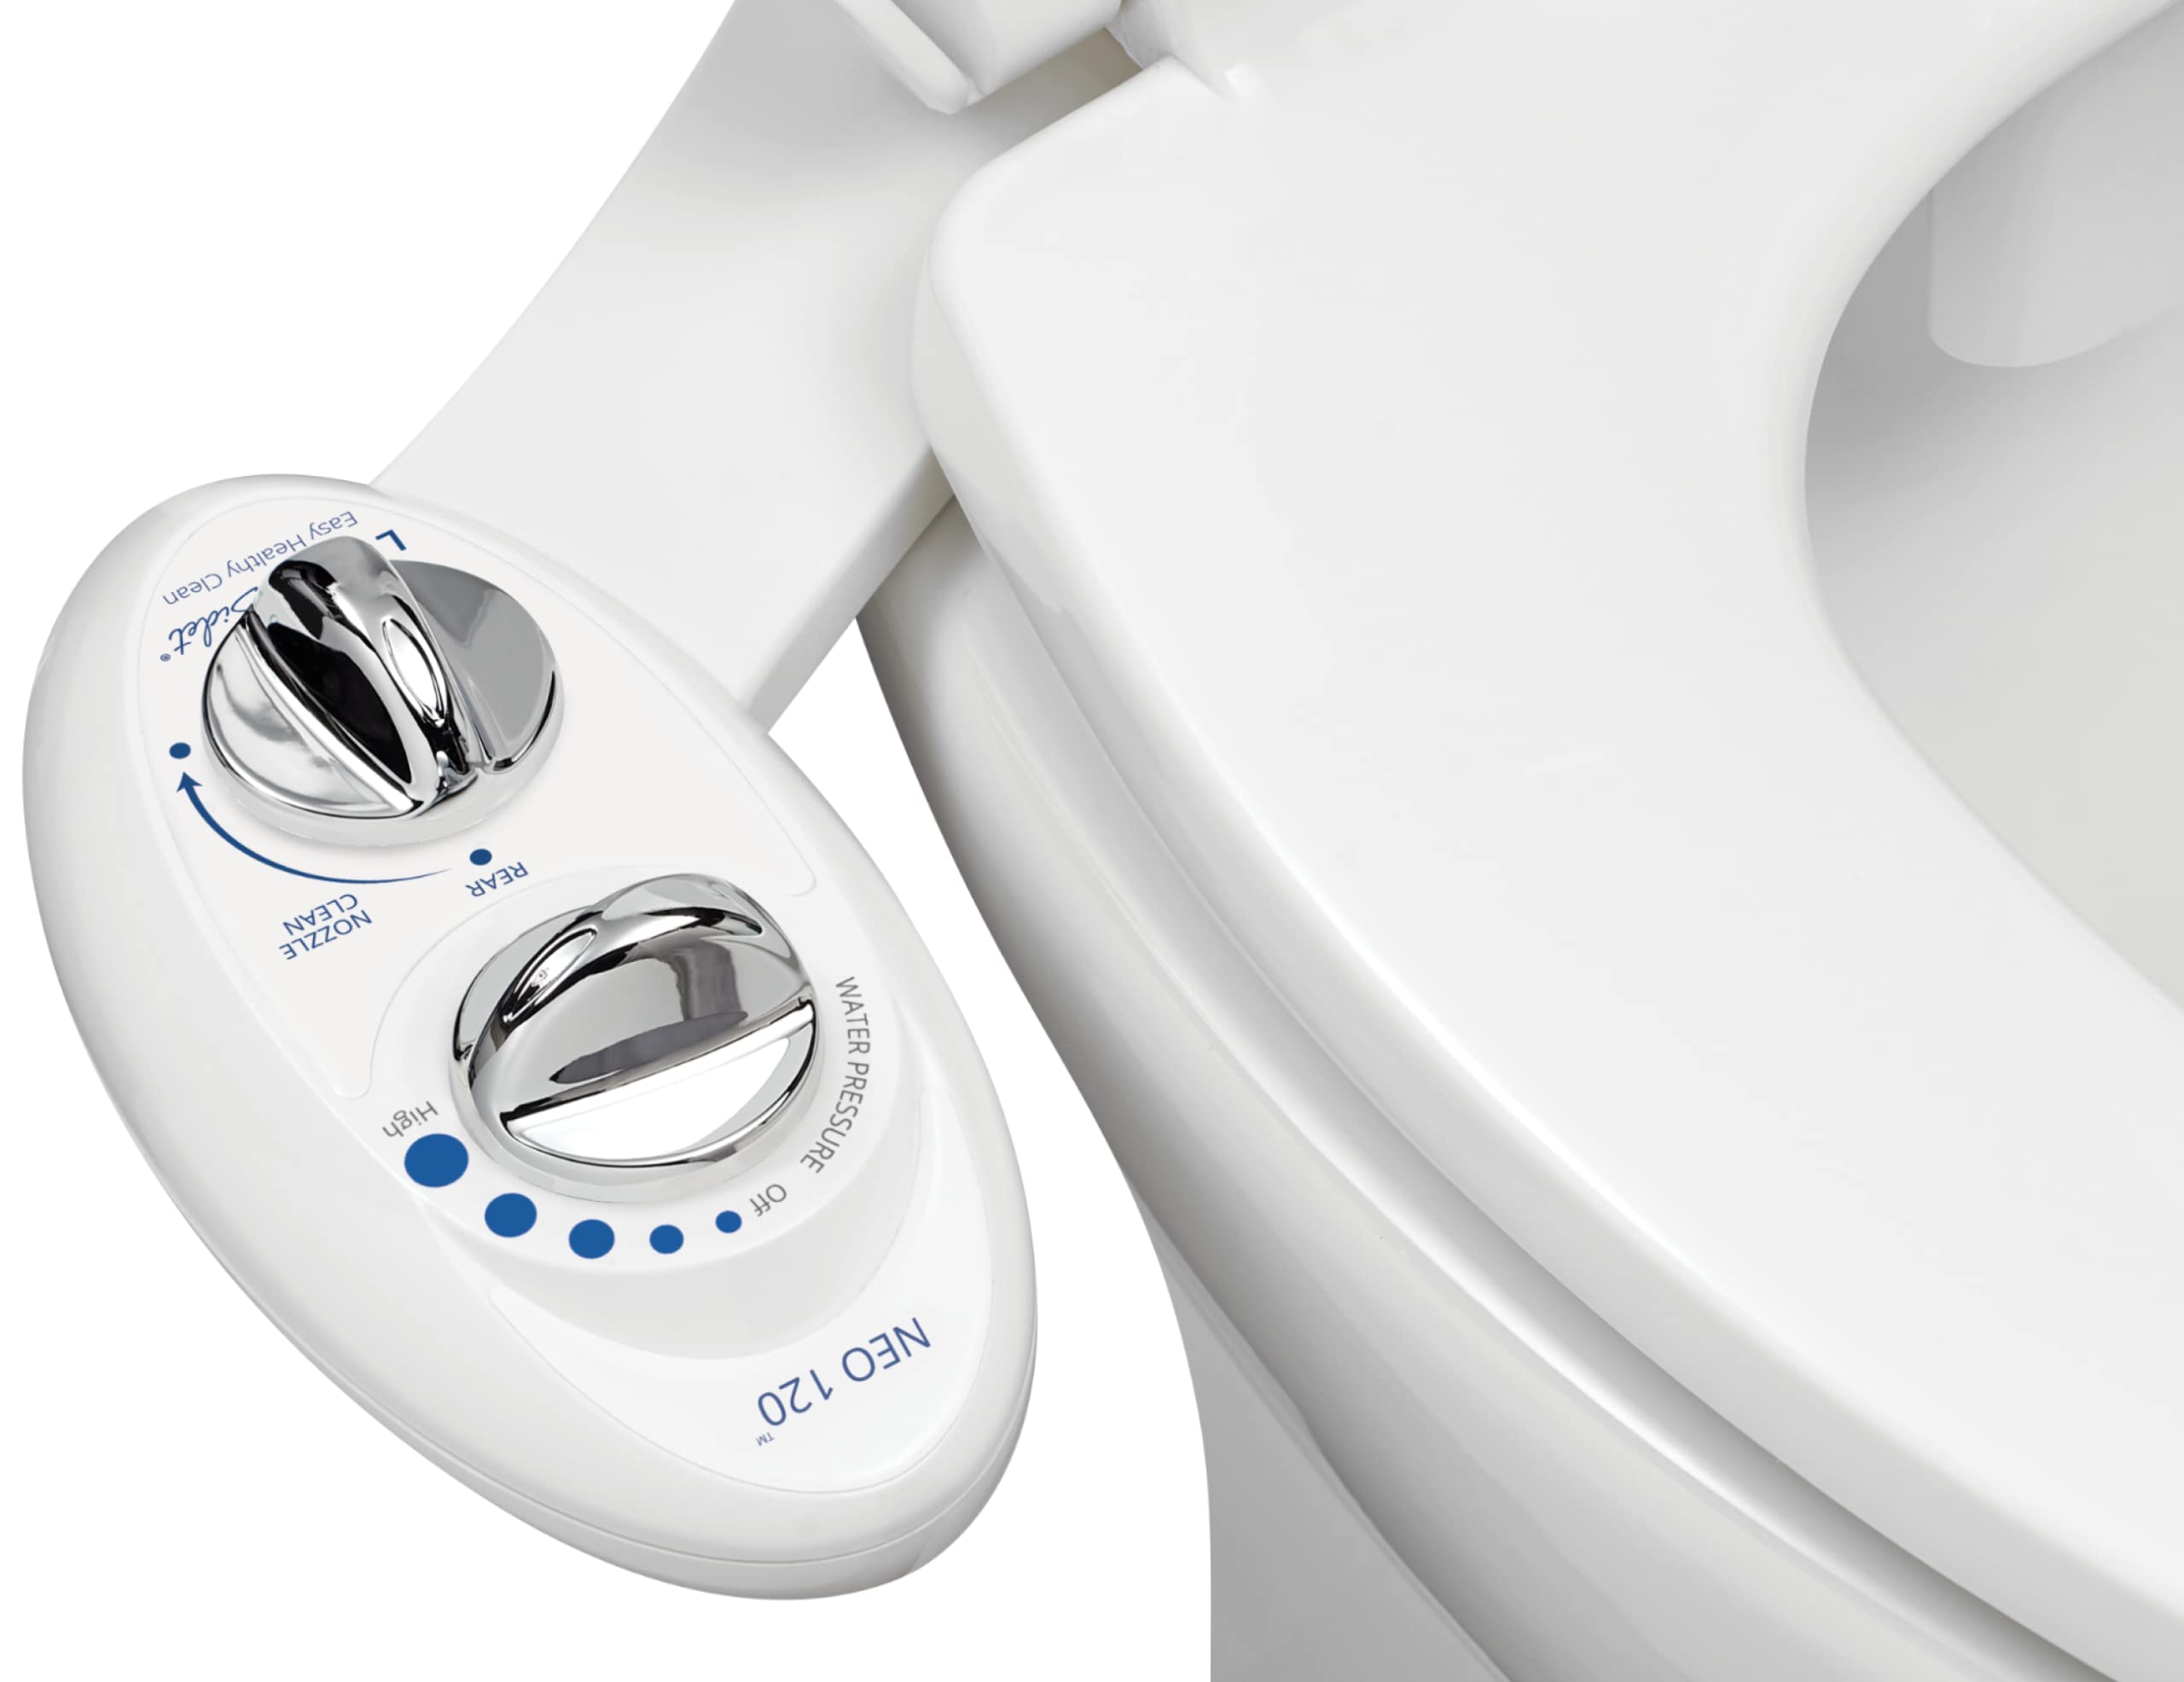 LUXE Bidet NEO 120 - Self-Cleaning Nozzle, Fresh Water Non-Electric Bidet Attachment for Toilet Seat, Adjustable Water Pressure, Rear Wash (White), 17 x 10 x 3 inches